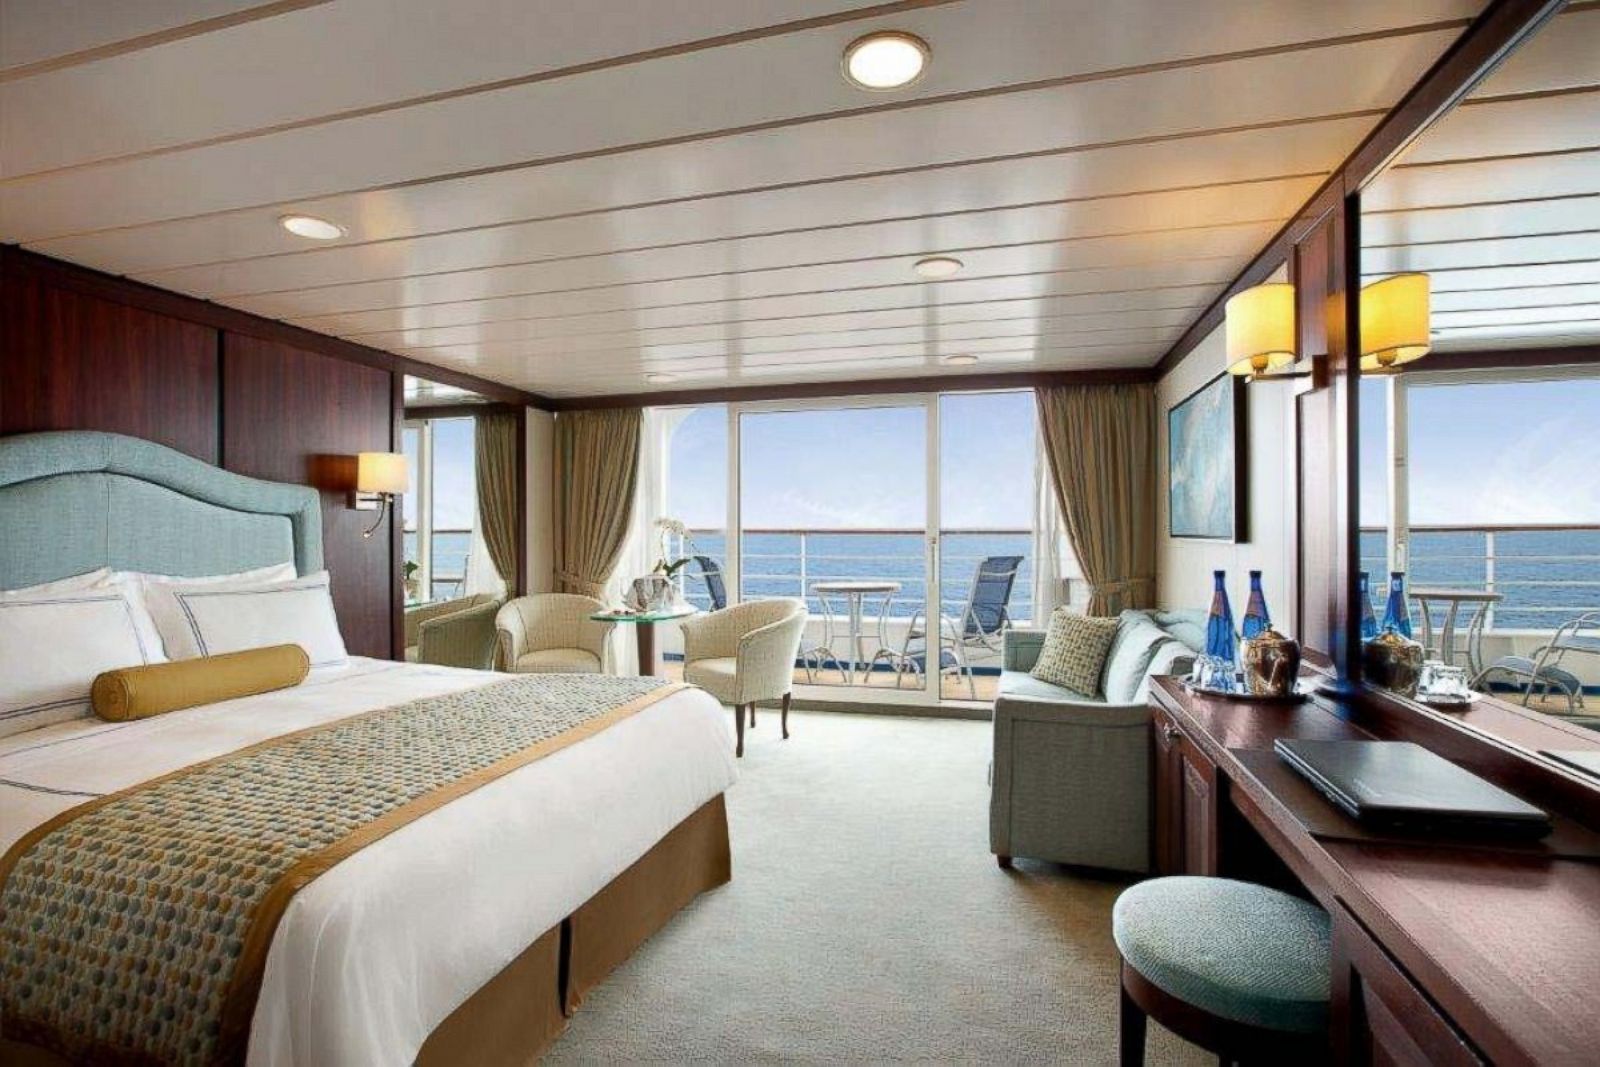 10 tried and trusted ways to score a cruise cabin upgrade